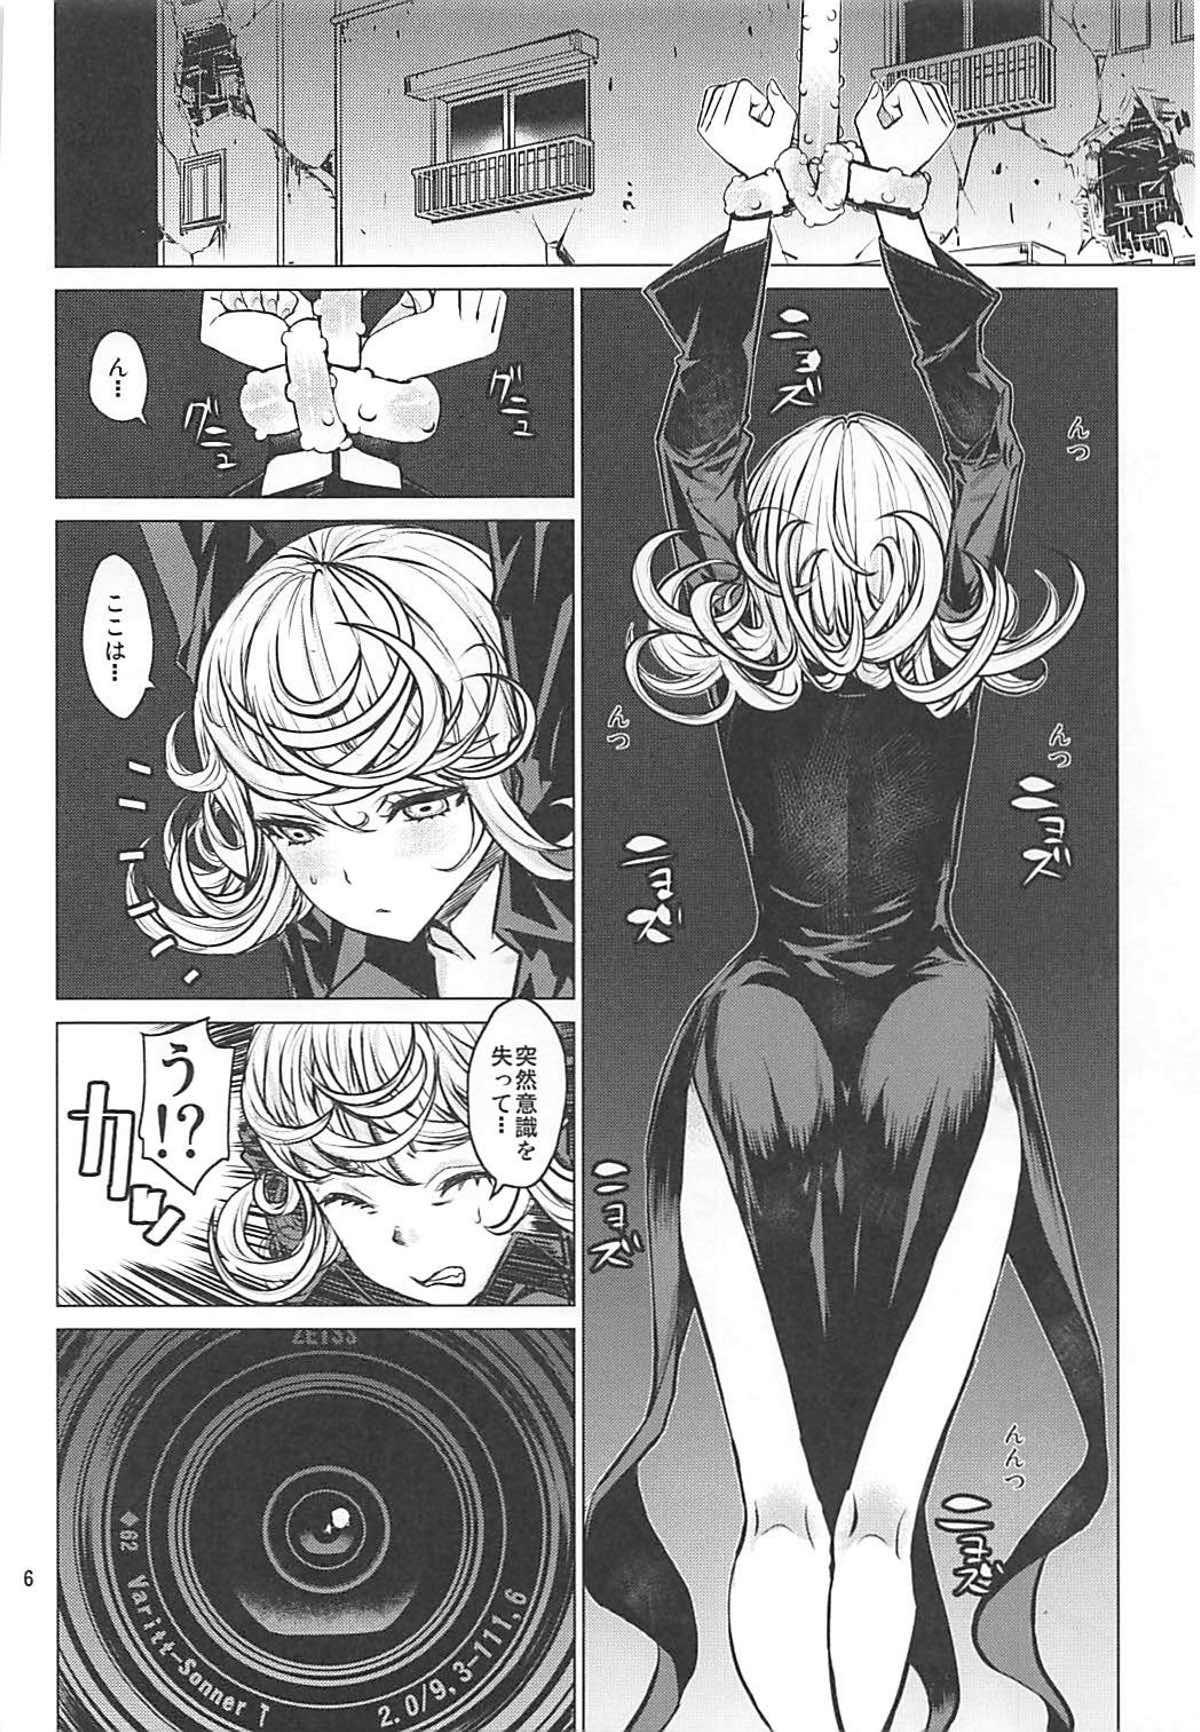 Creampies Disaster Sisters Leopard Hon 25 - One punch man Tesao - Page 5